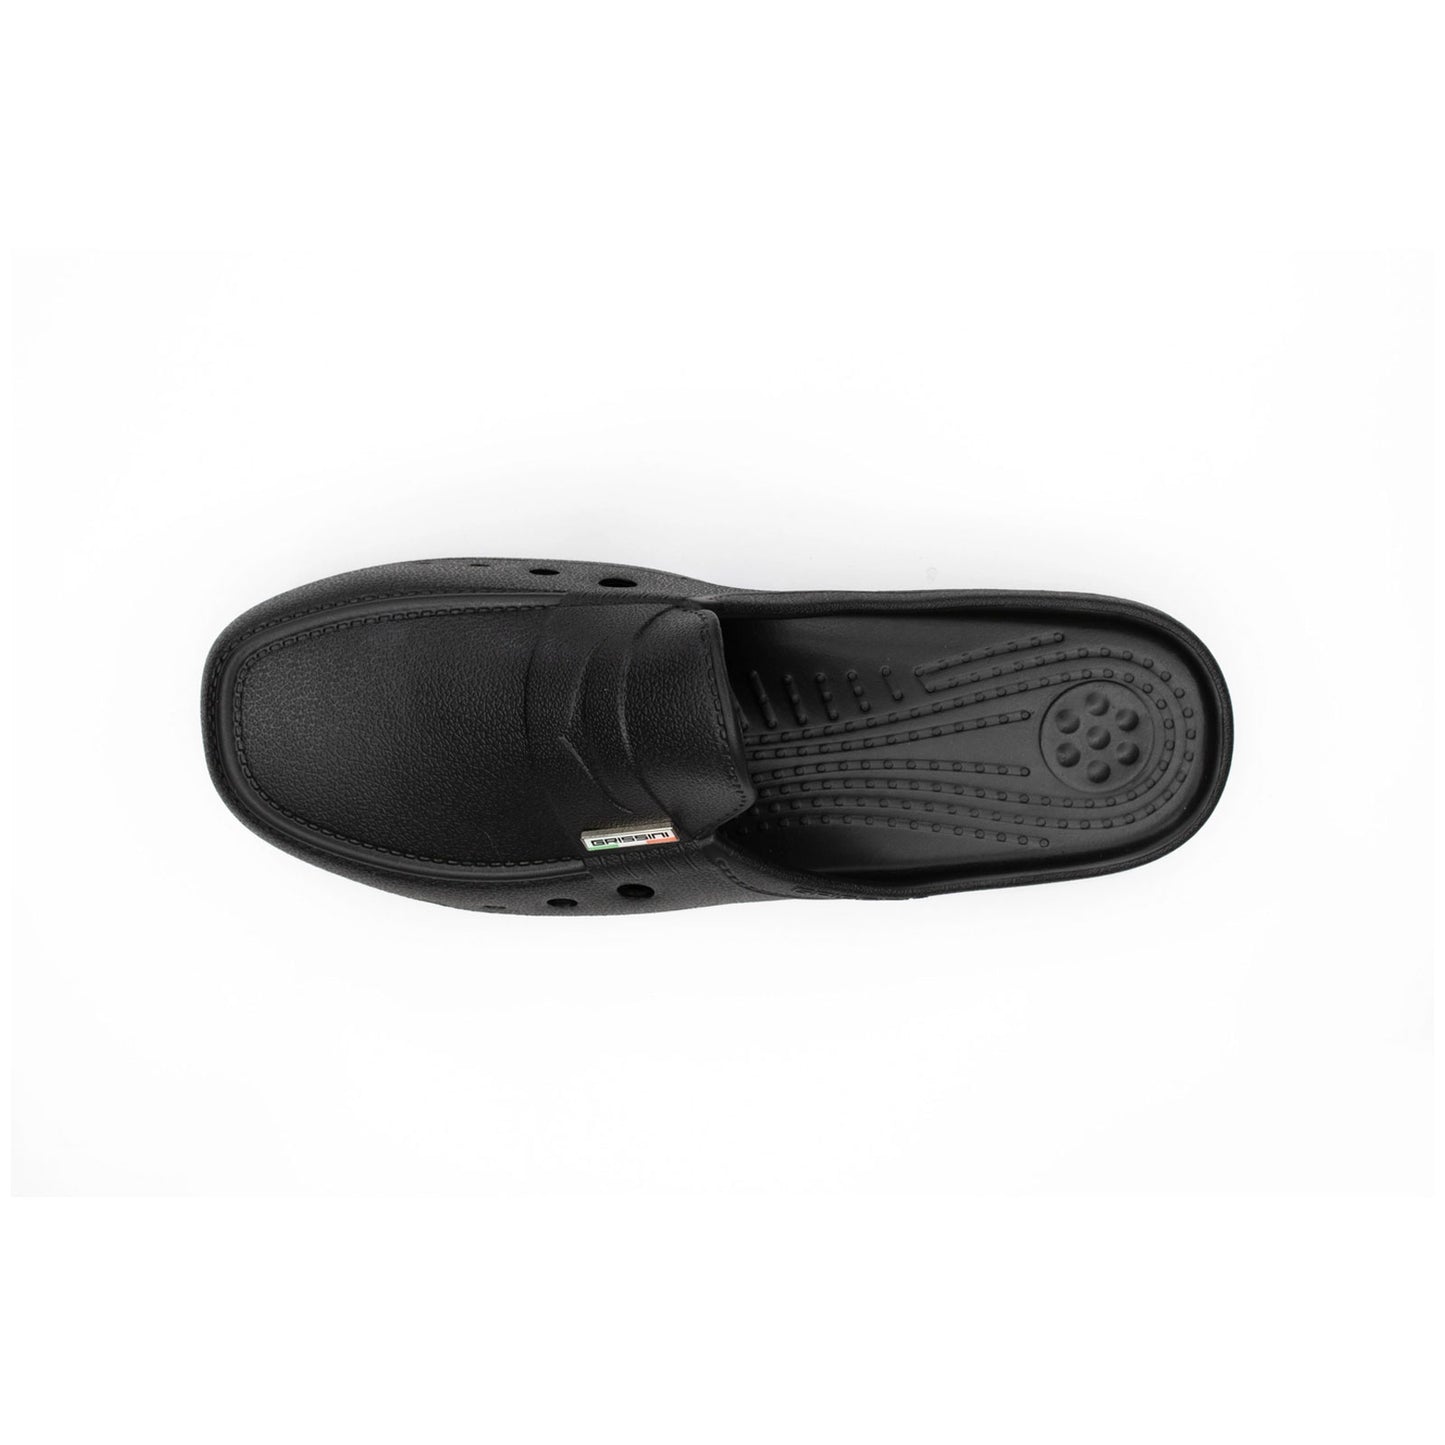 Chance Loafer in Black